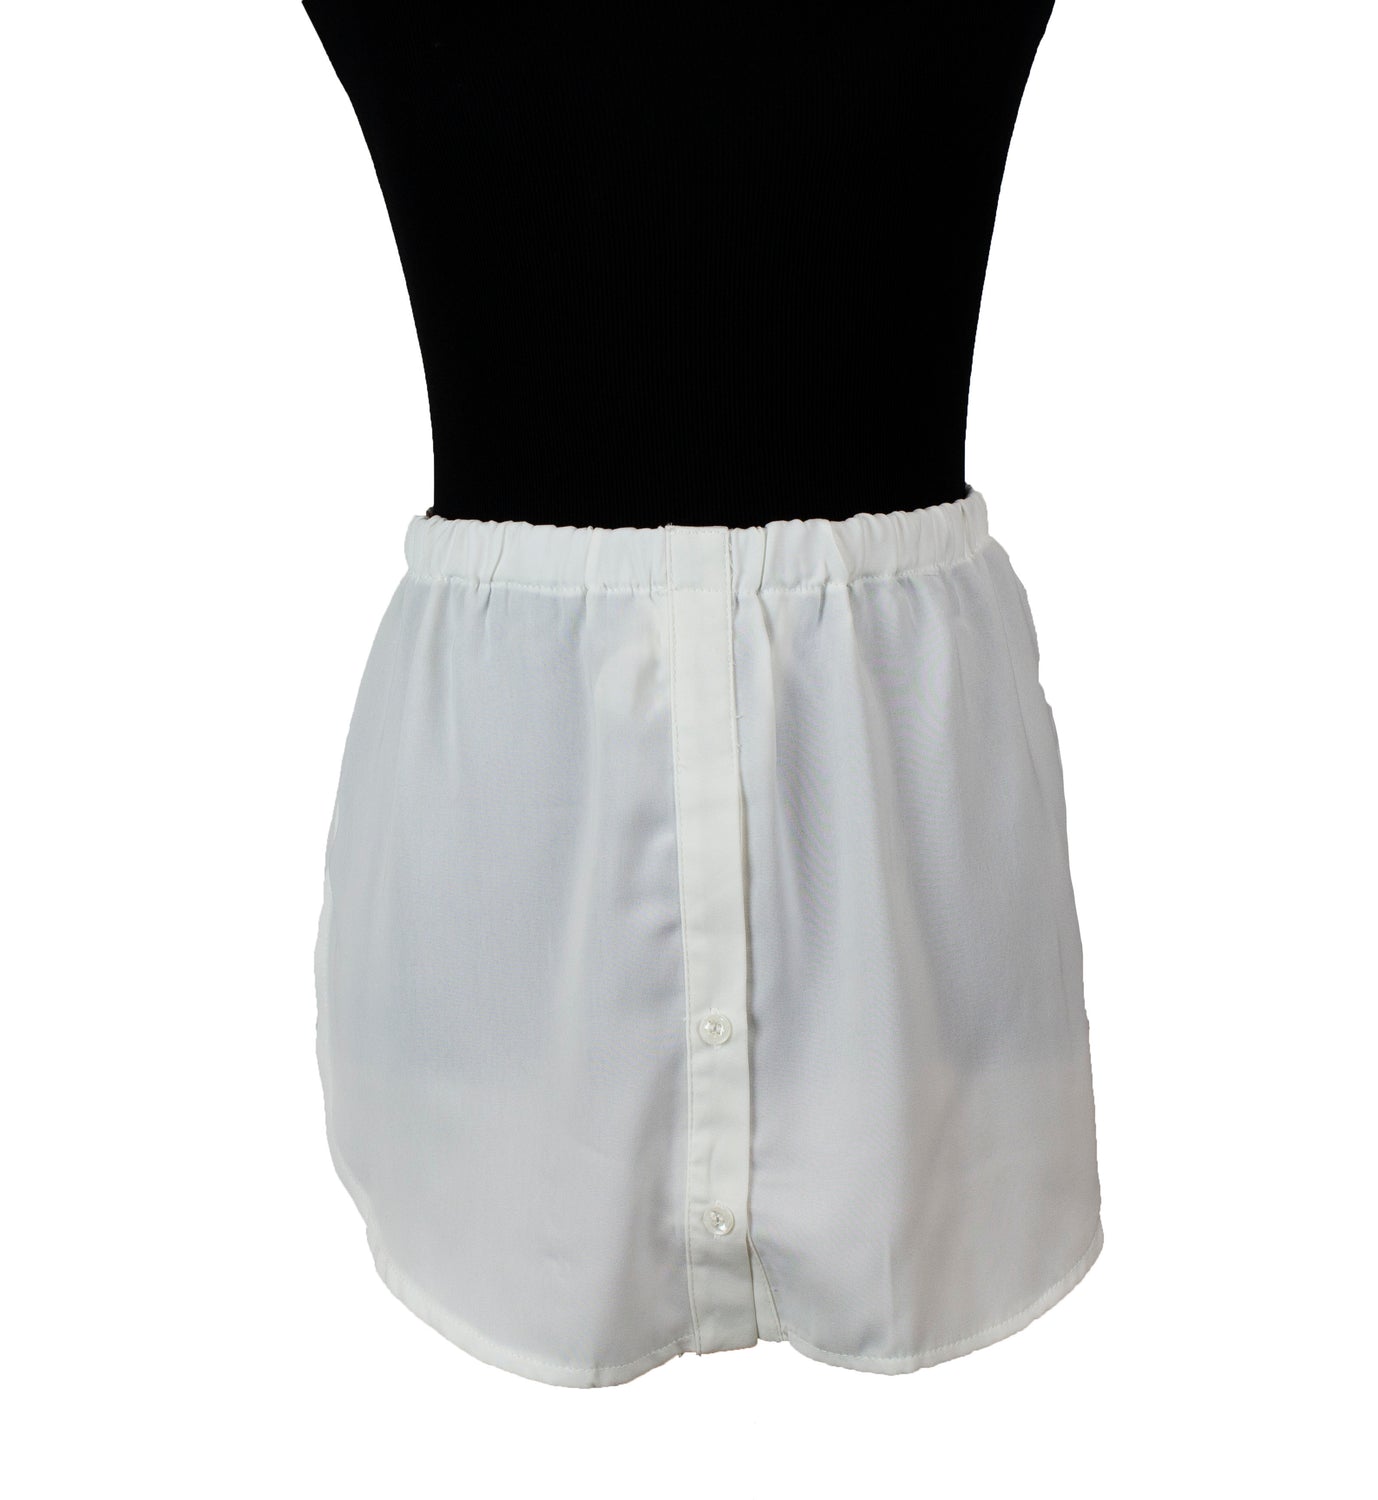 fake shirt extender in white with buttons and an elastic waistband